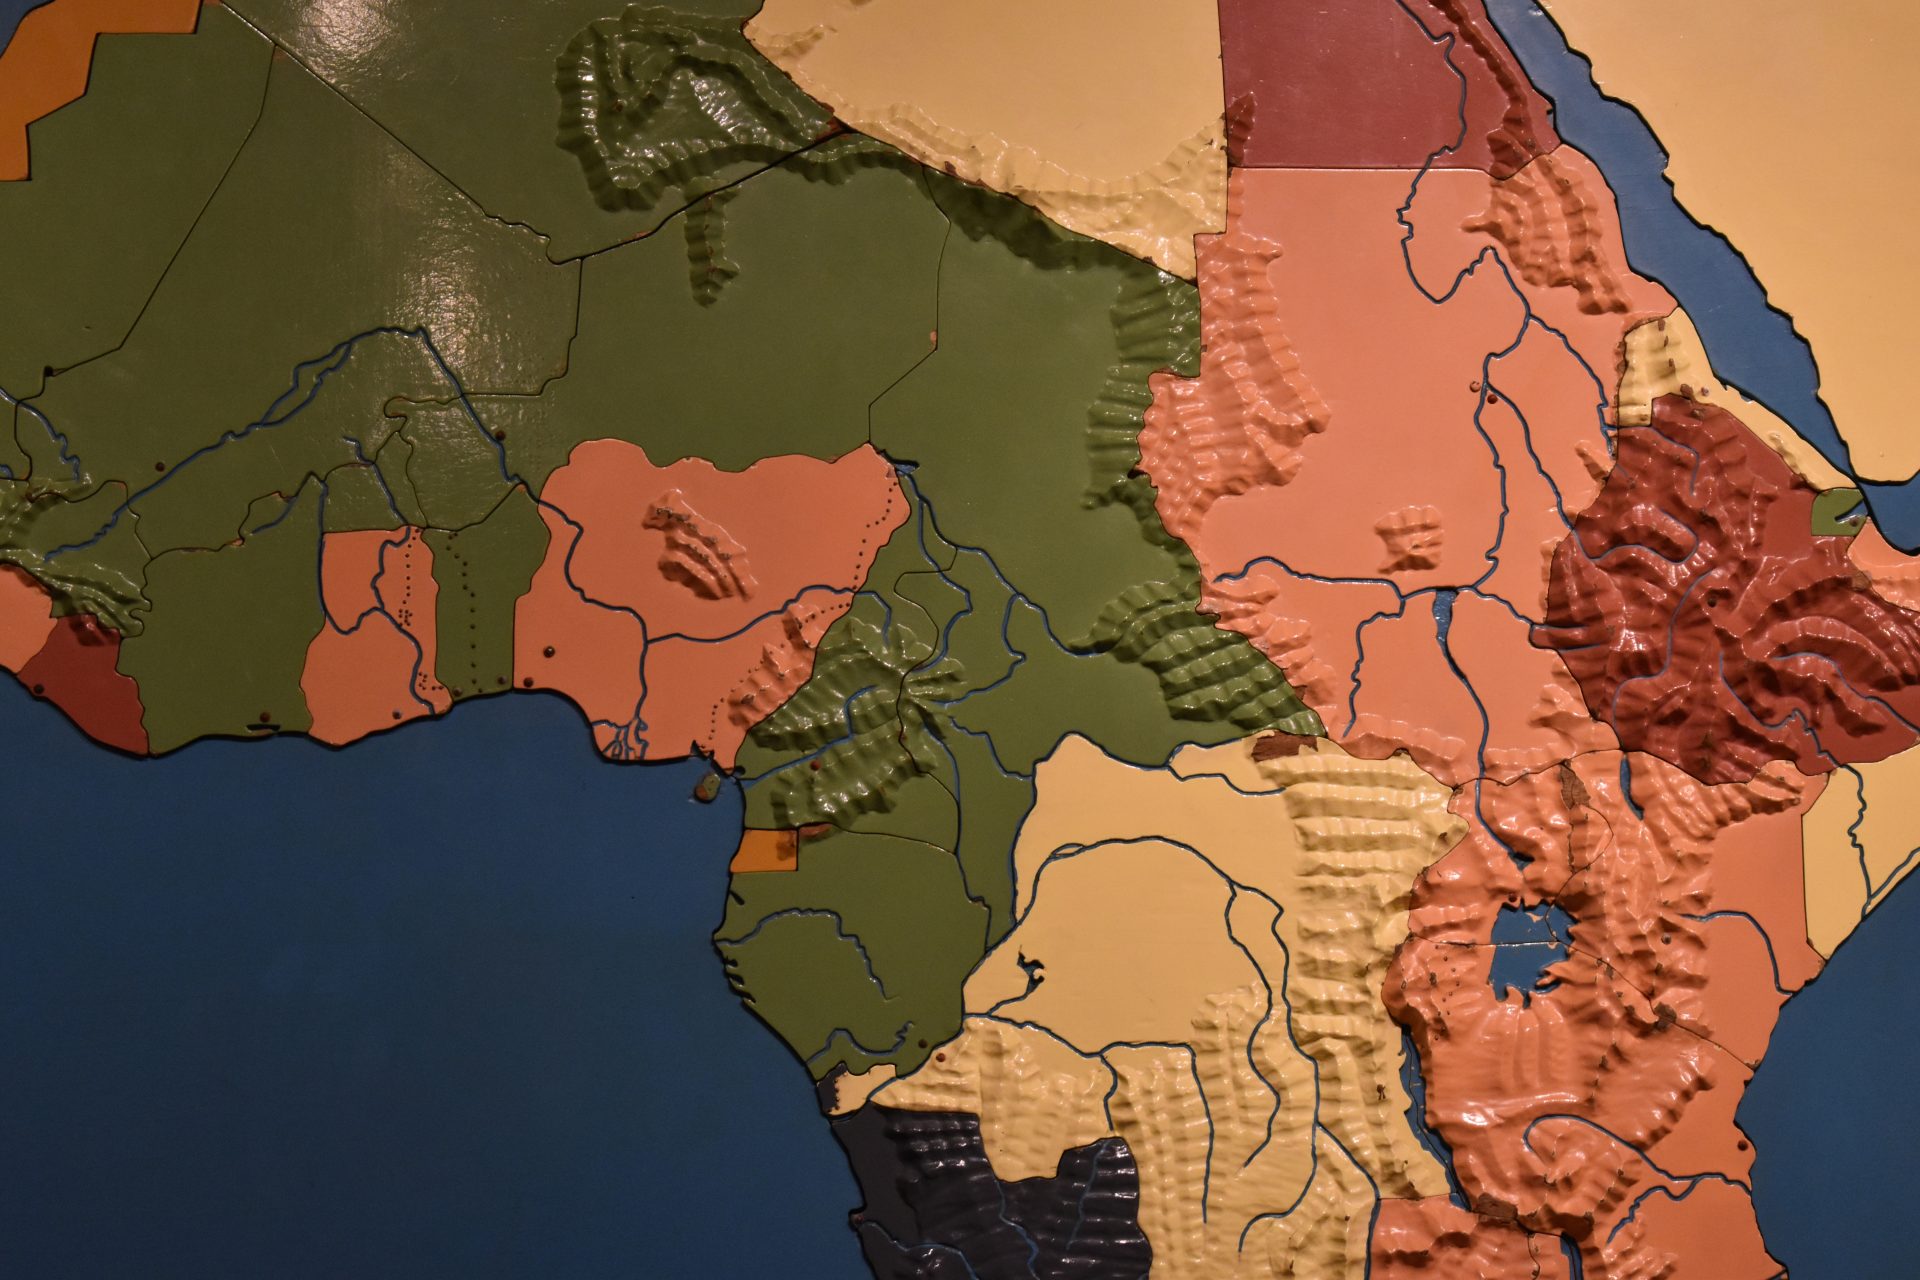 Detail of the puzzle map of Africa, showing division lines between countries, mountains carved in relief, and rivers and lakes that are recessed.